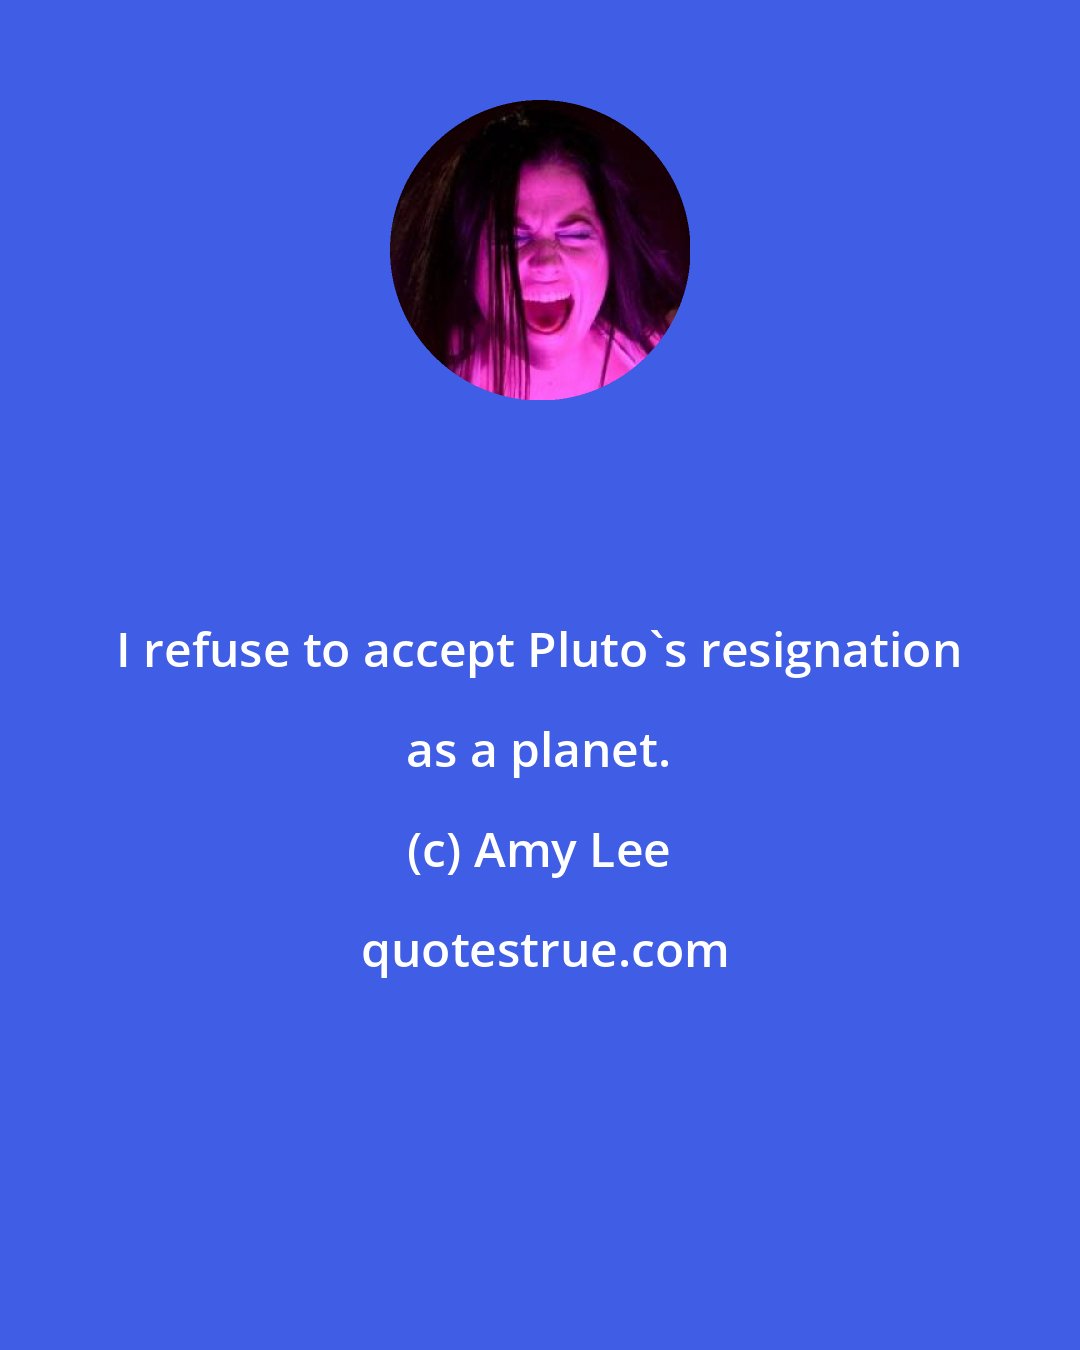 Amy Lee: I refuse to accept Pluto's resignation as a planet.